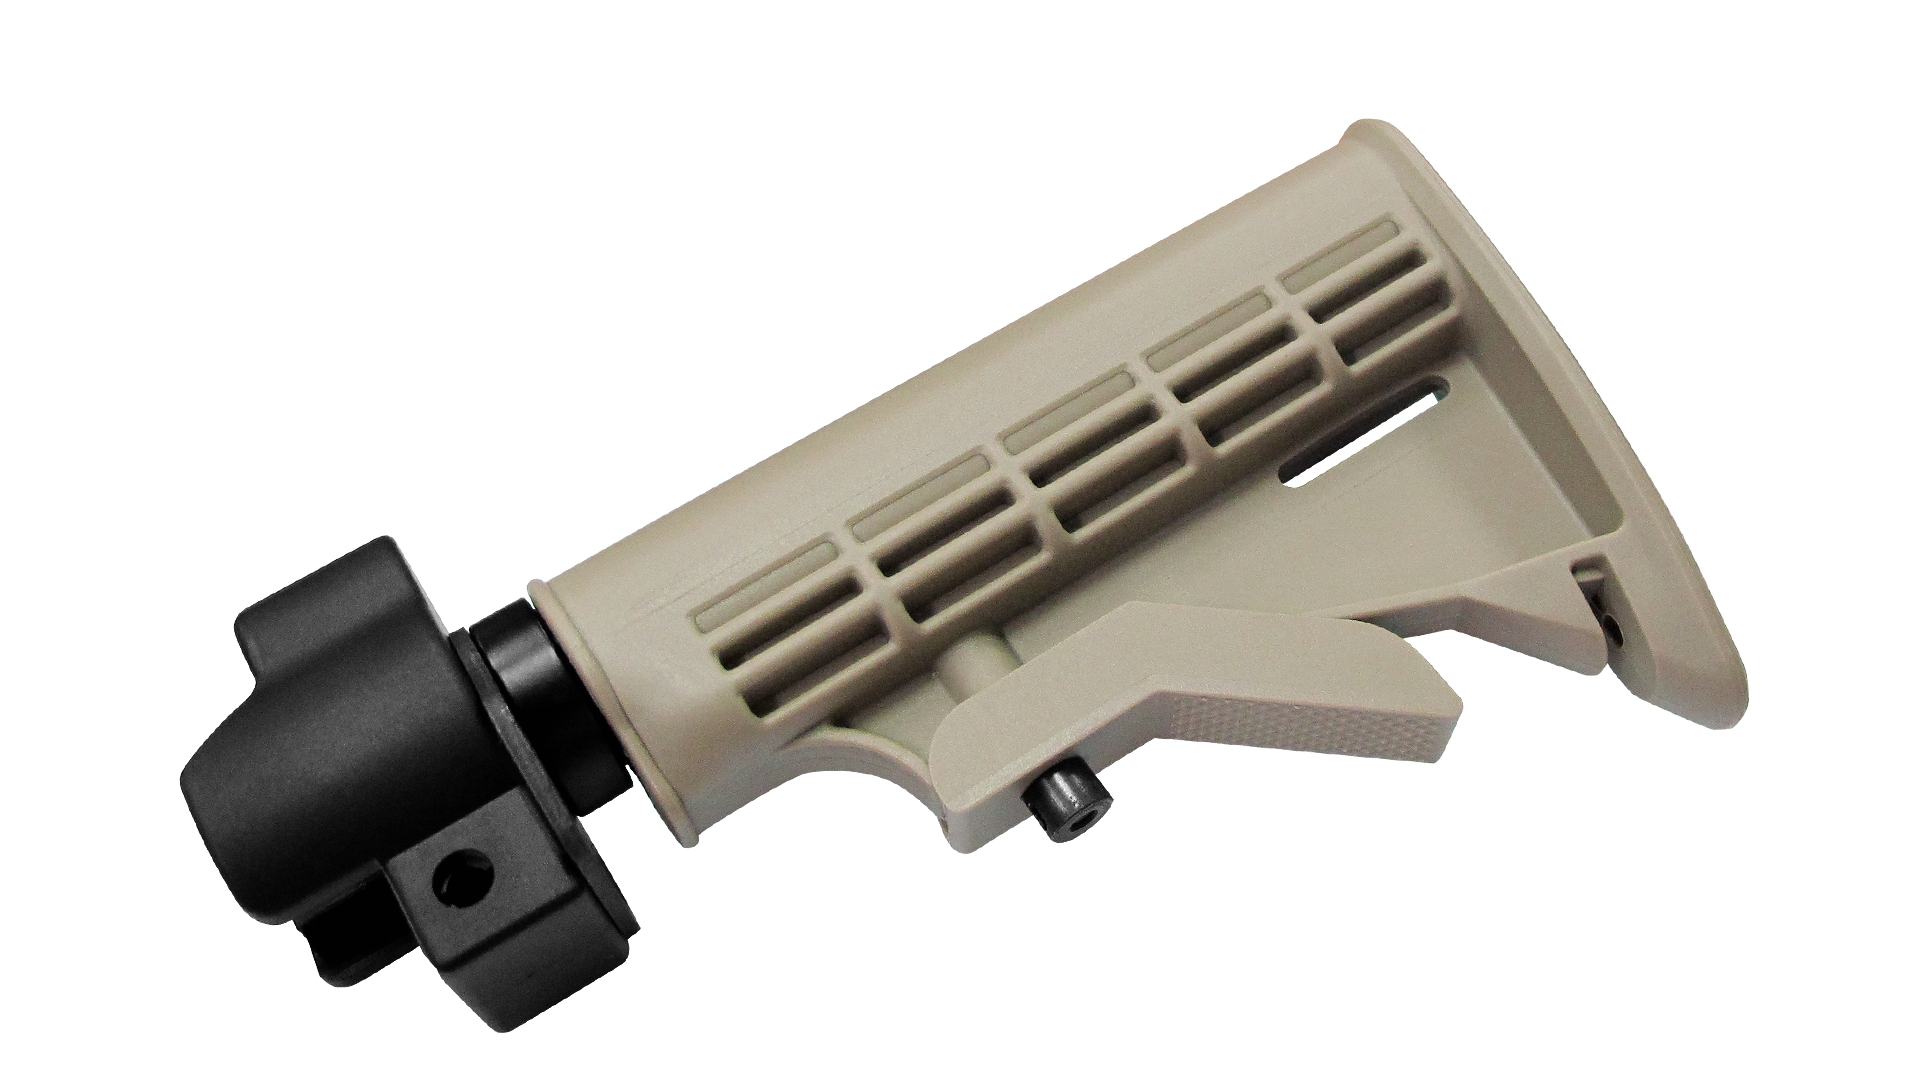 【Discontinued】【MP-130】RETRACTABLE STOCK WITH CS4 ADAPTOR - TAN